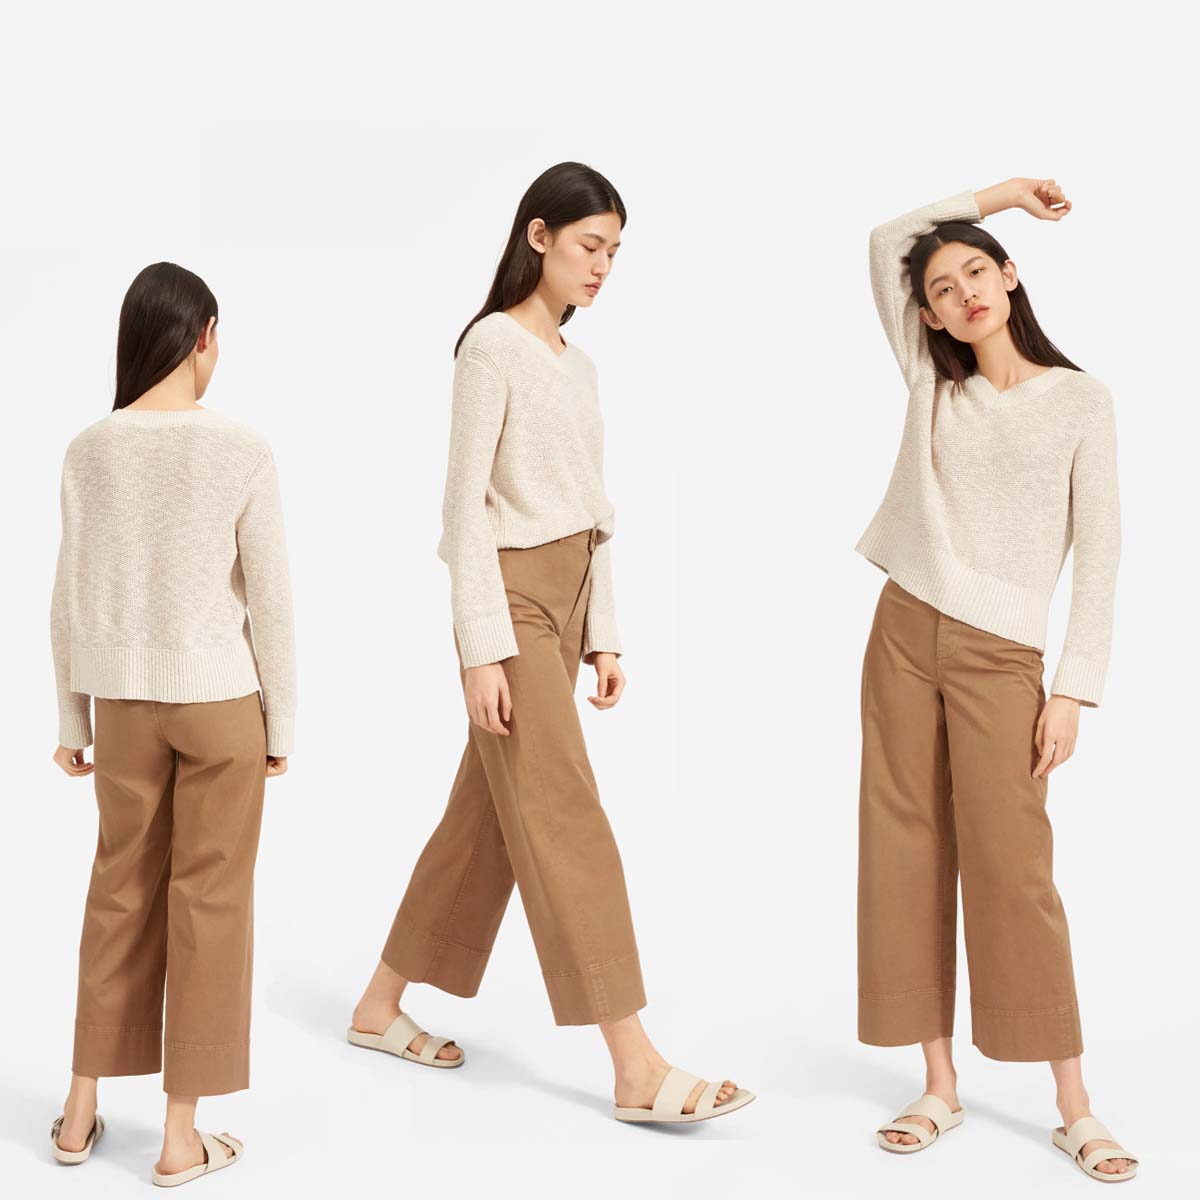 Everlane Reviews: Crewneck Sweatshirt and Two Pairs of Jeans